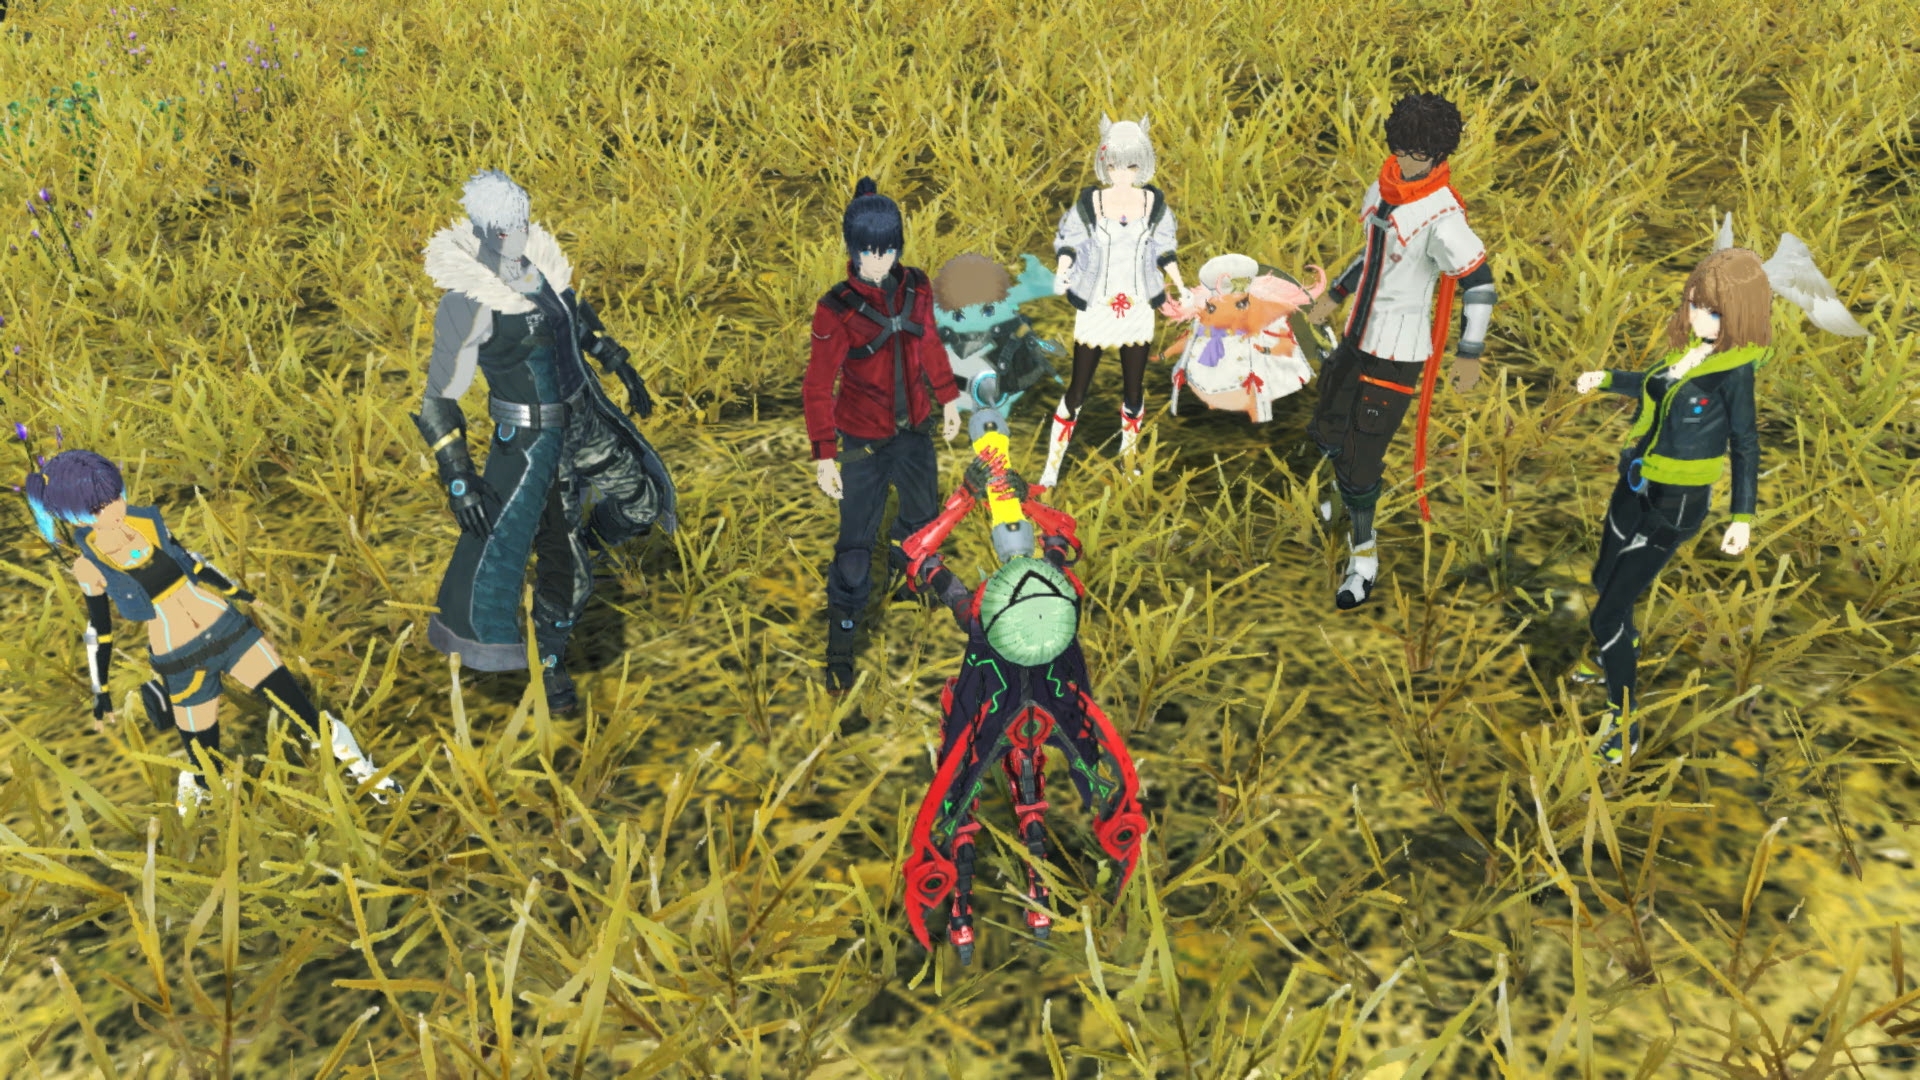 Xenoblade Chronicles 3 reveals initial DLC outfits, wave 2 Expansion Pass  tease